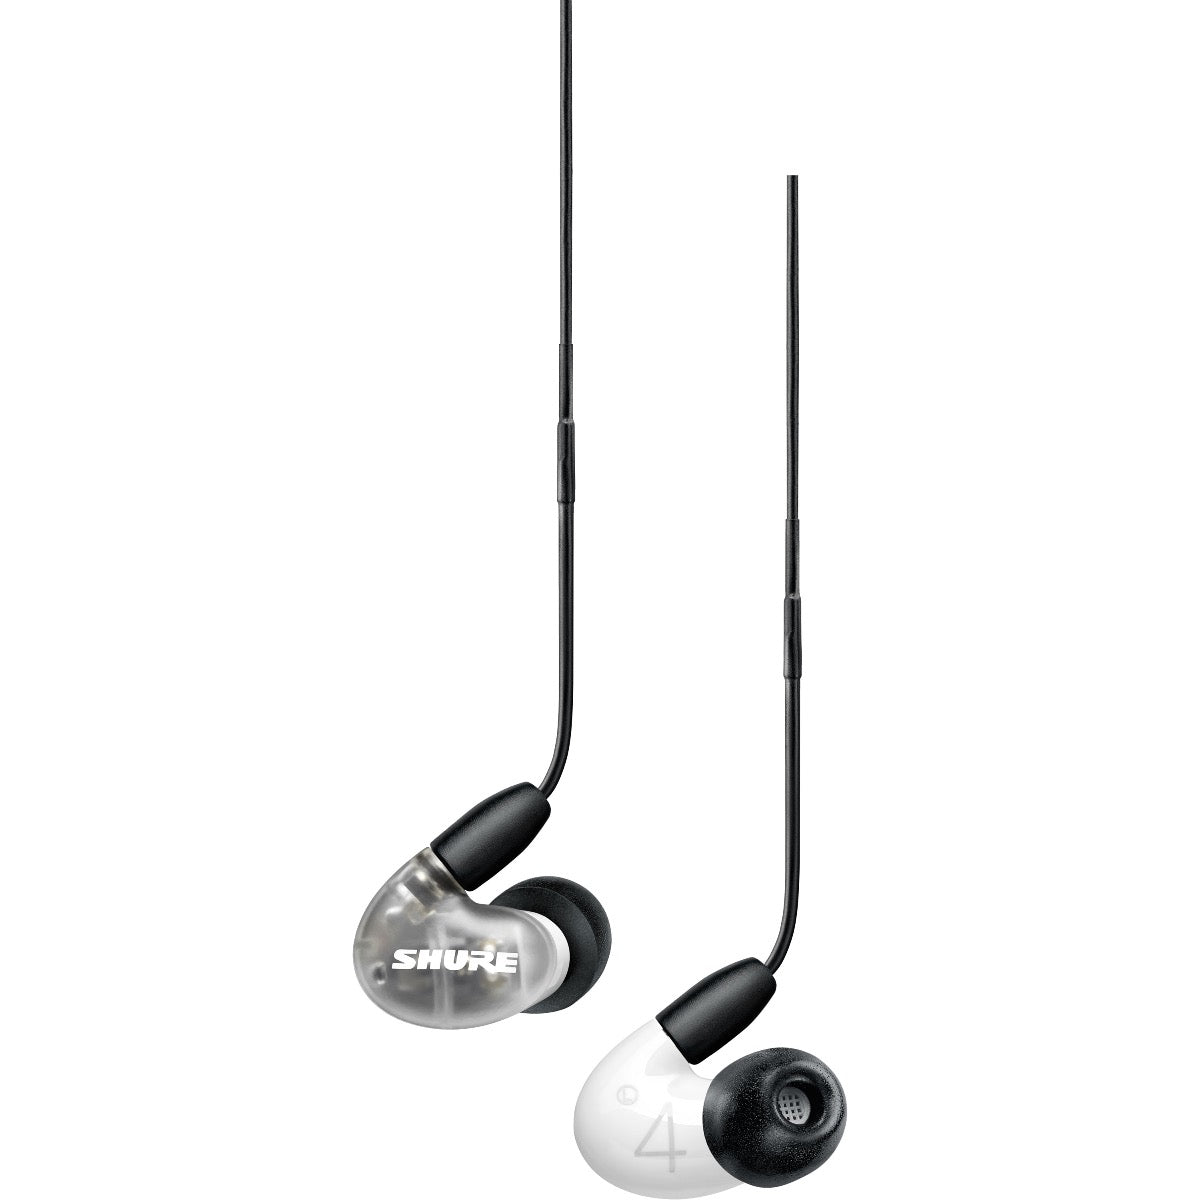 Close up view of Shure AONIC 4 Sound Isolating Earphones - Clear/White earpieces showing both sides